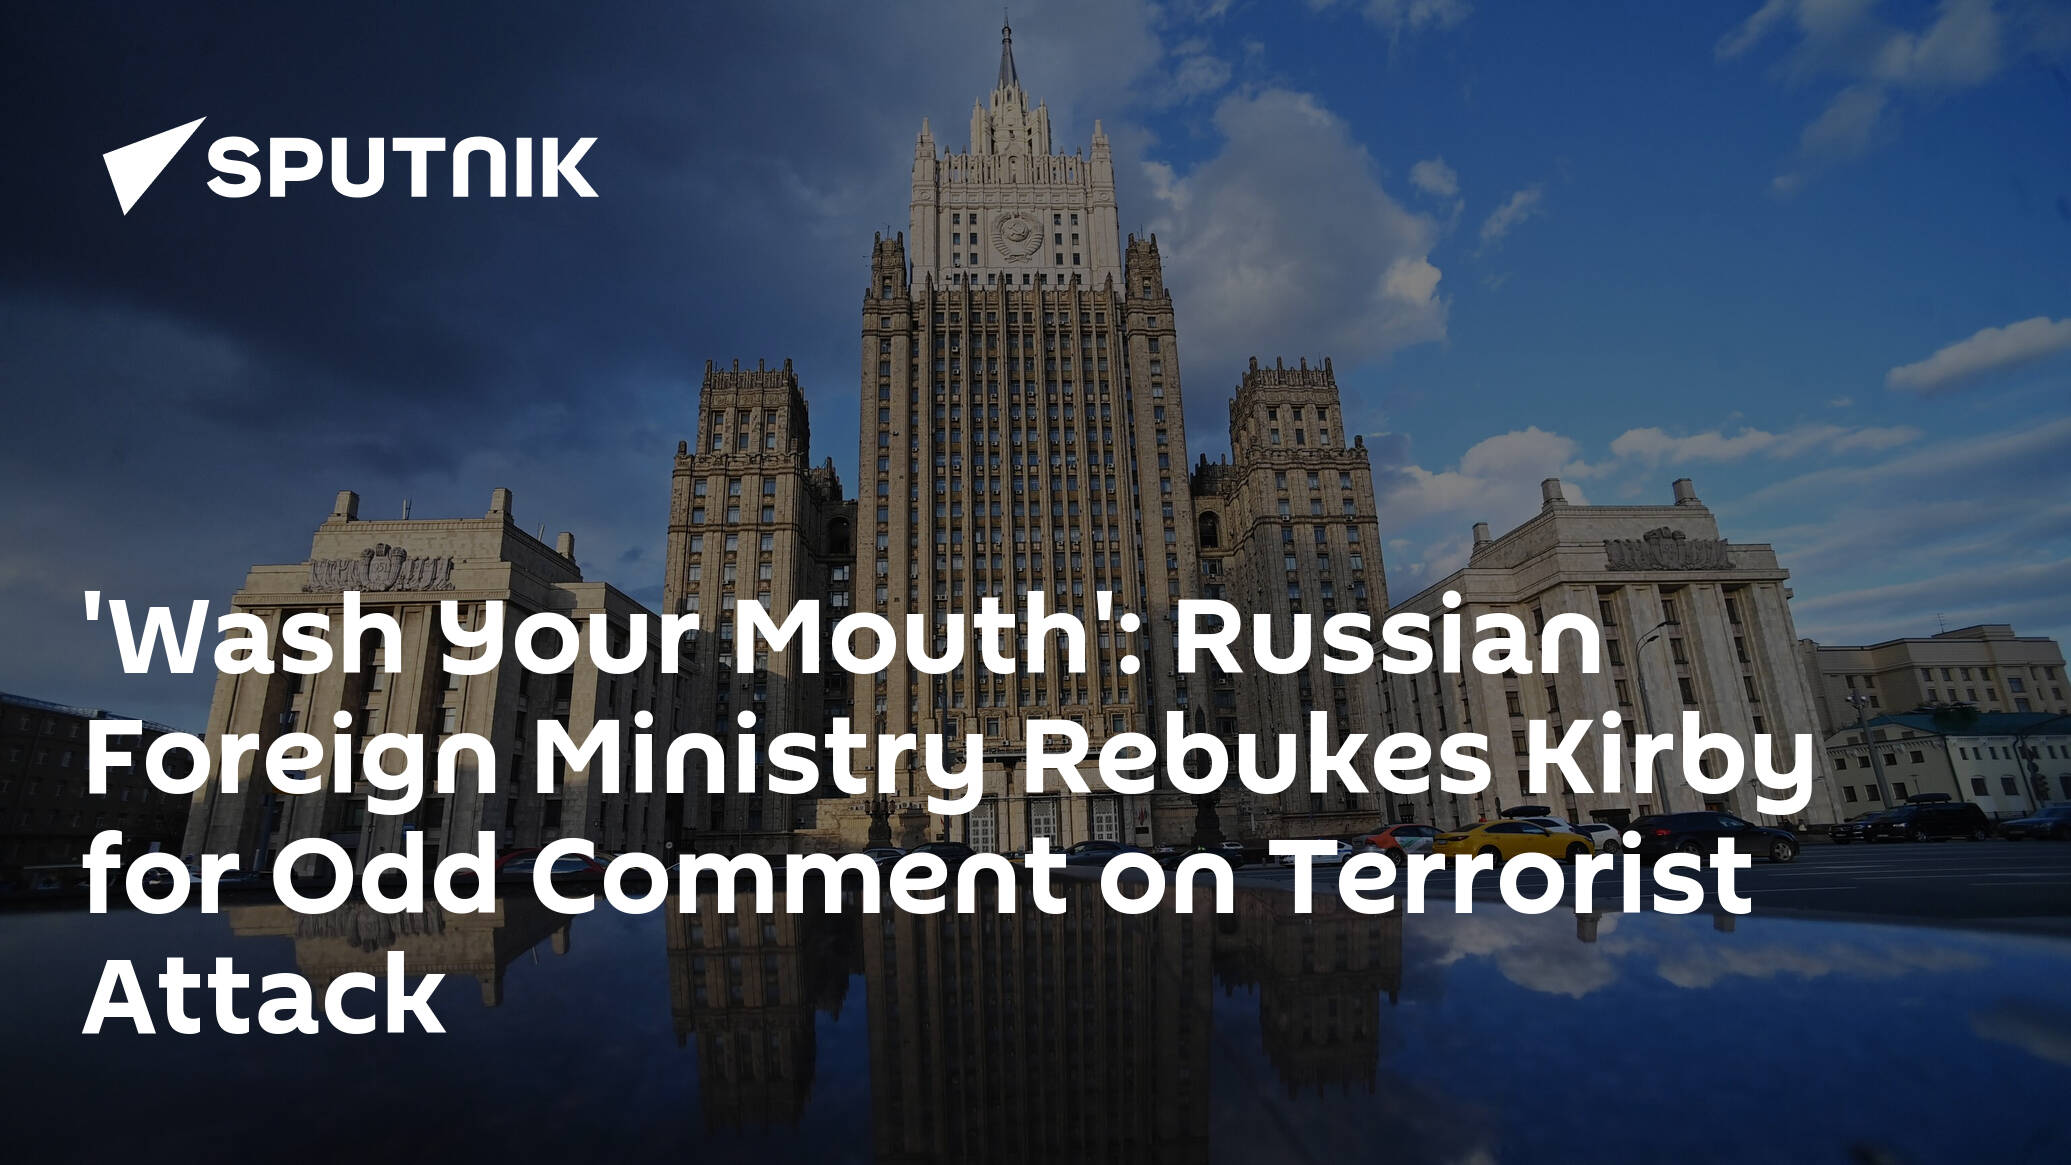 Wash Your Mouth' Russian Foreign Ministry Rebukes Kirby for Odd